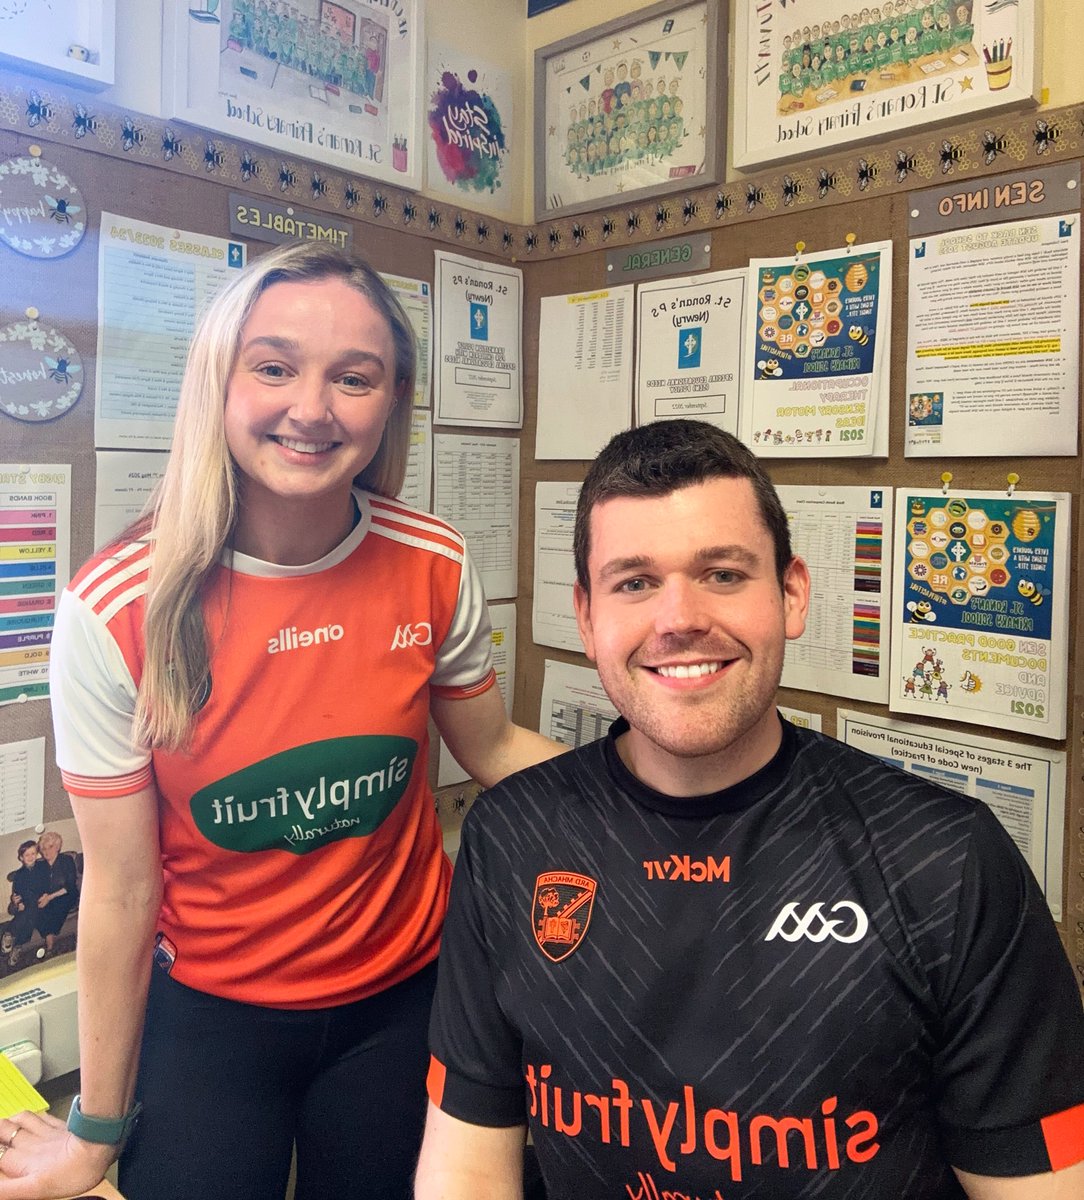 In a Co.Down school, we survived. Come on, @Armagh_GAA 🙌🏼 🏆